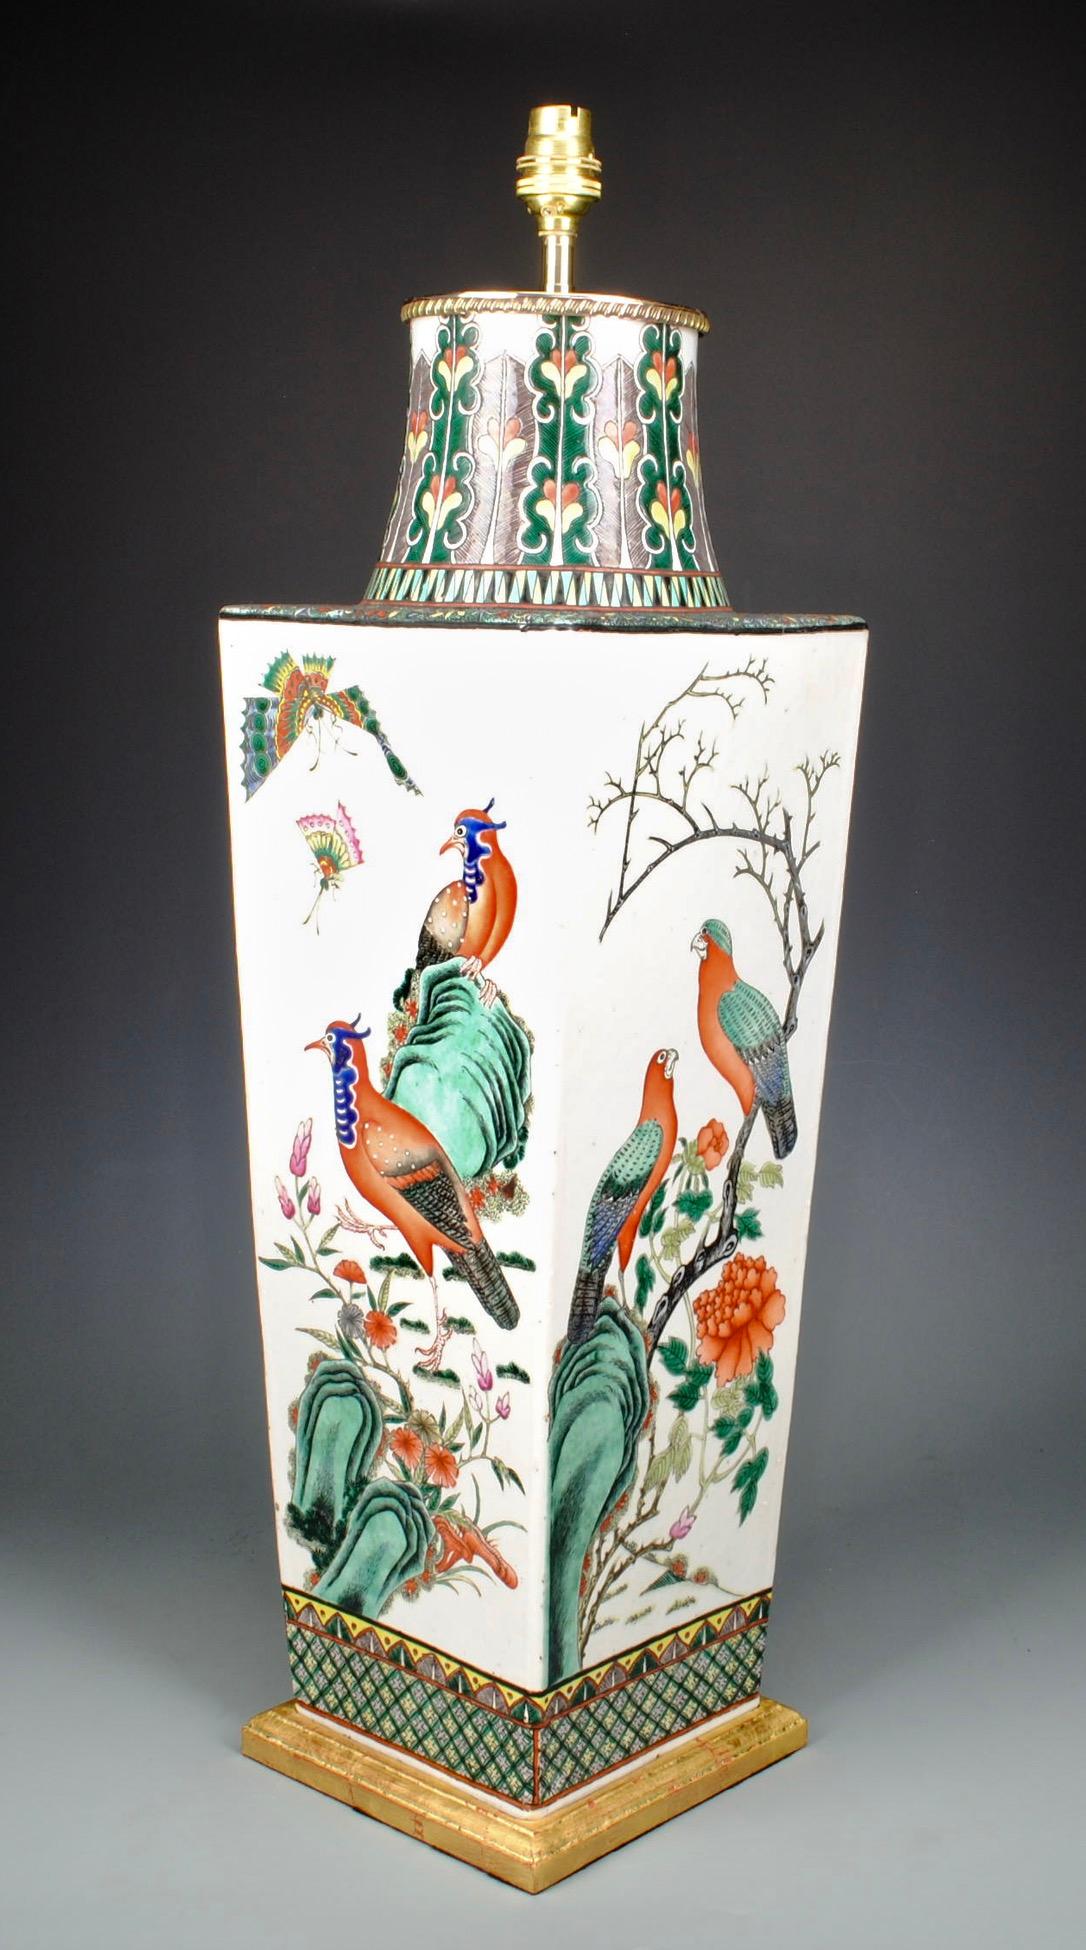 A fine 19th century Chinese famille verte tapered square vase, now mounted as a table lamp with gilt brass fittings. Beautifully decorated with brightly painted exotic birds and butterflies on a white ground.

Height of vase: 22.5 in (57 cm)